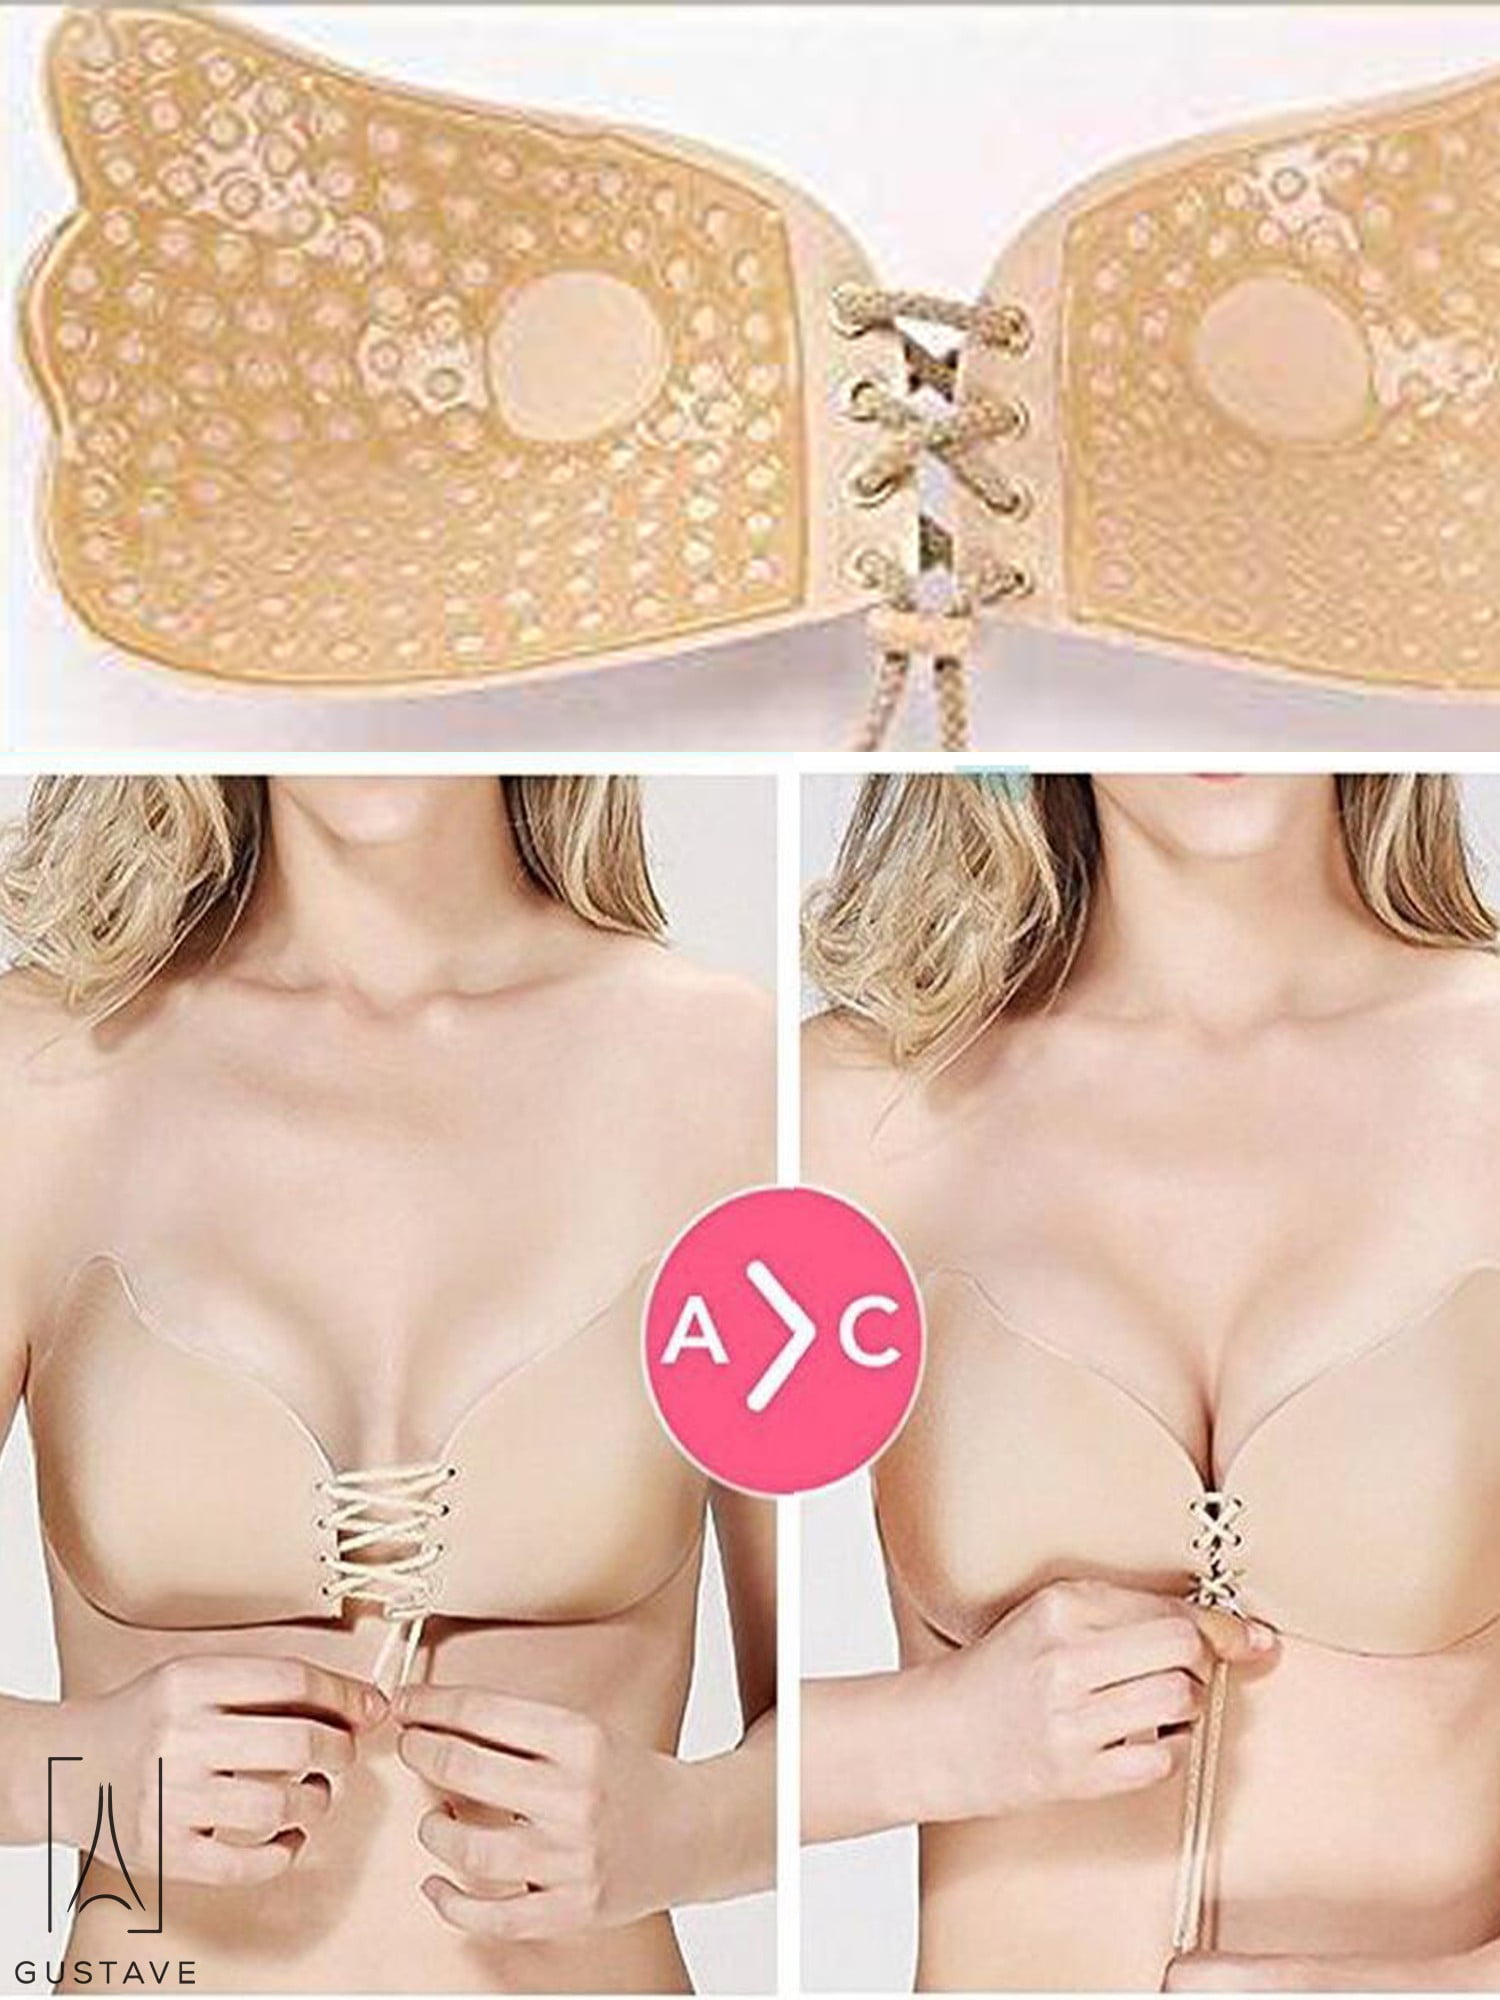 Strapless Bras Invisible Push Up Bra Silicone Brassiere Deep U Underwear  Dress Wedding Party Sticky Self Adhesive CL2346 From 10,6 €